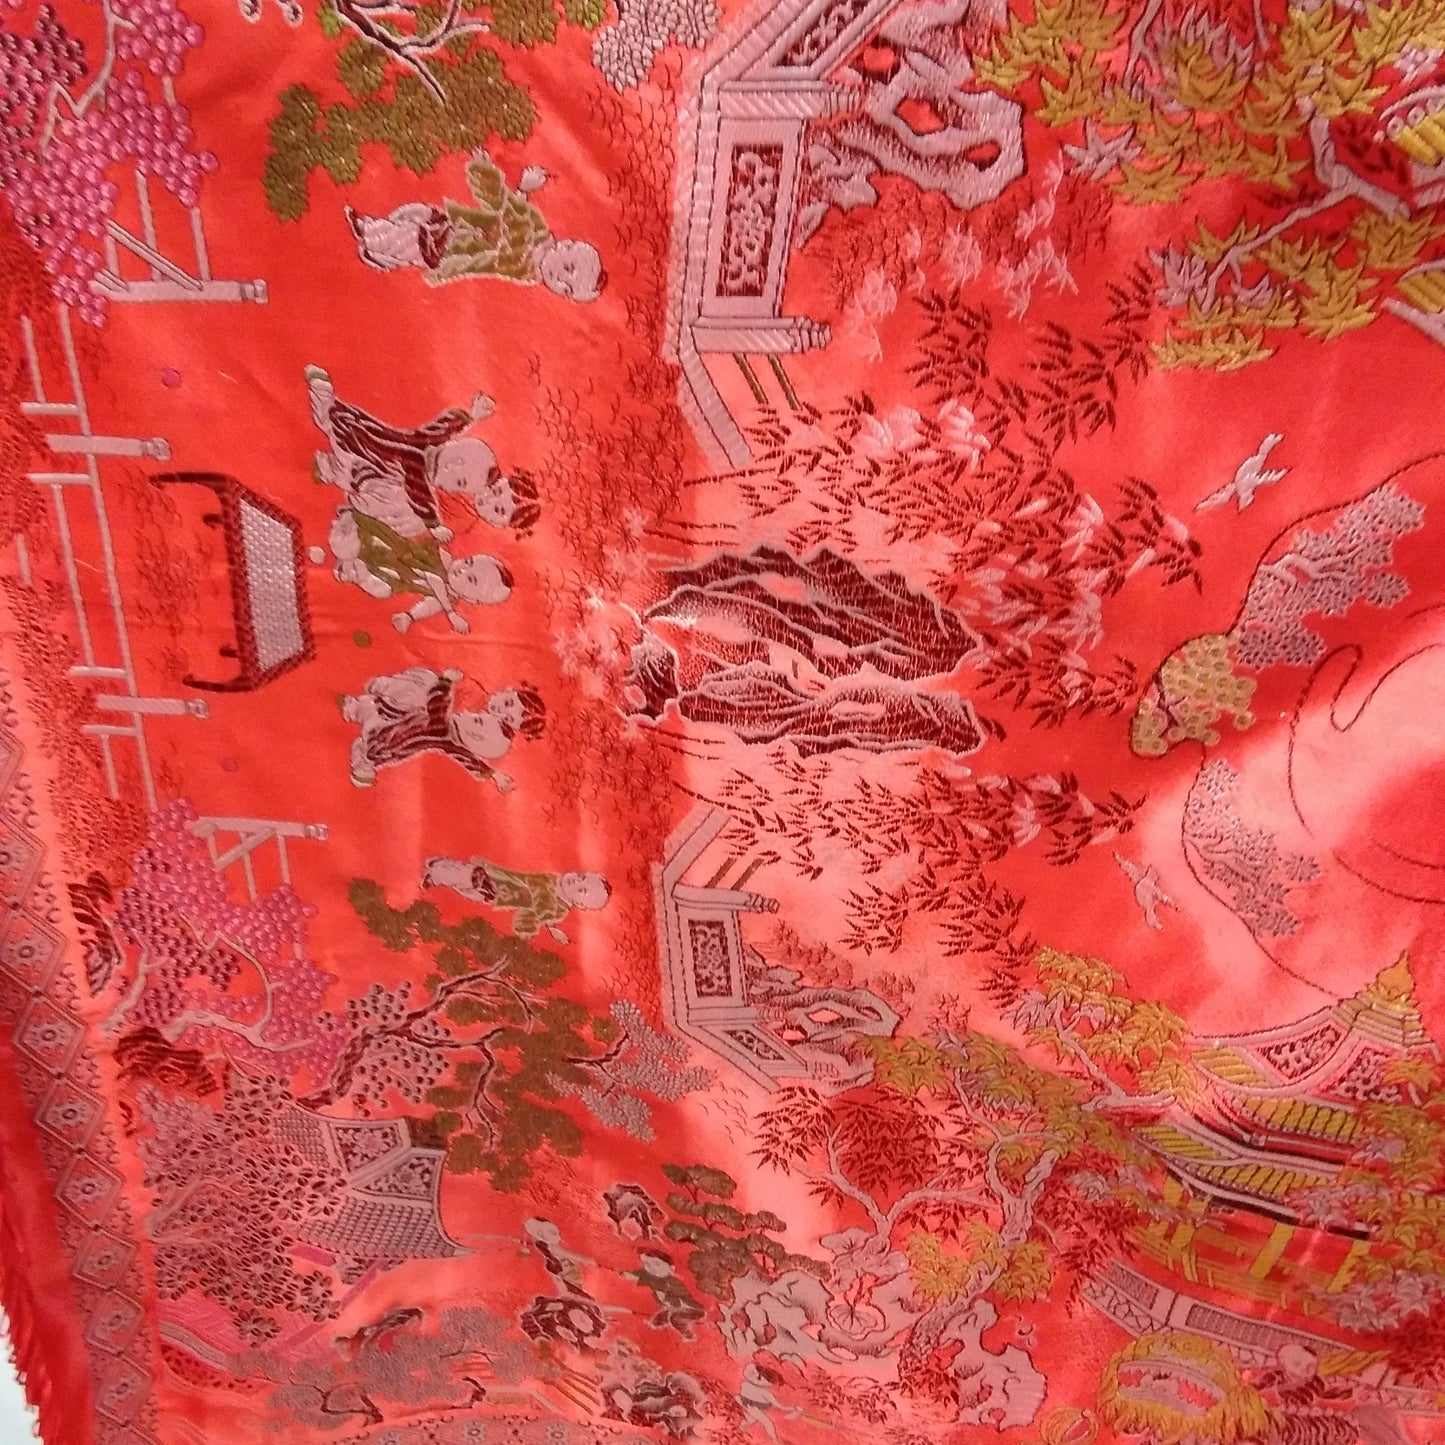 Brocaded Flowers Chinese Silk Embroidered Red Tapestry Cloth With Fringe